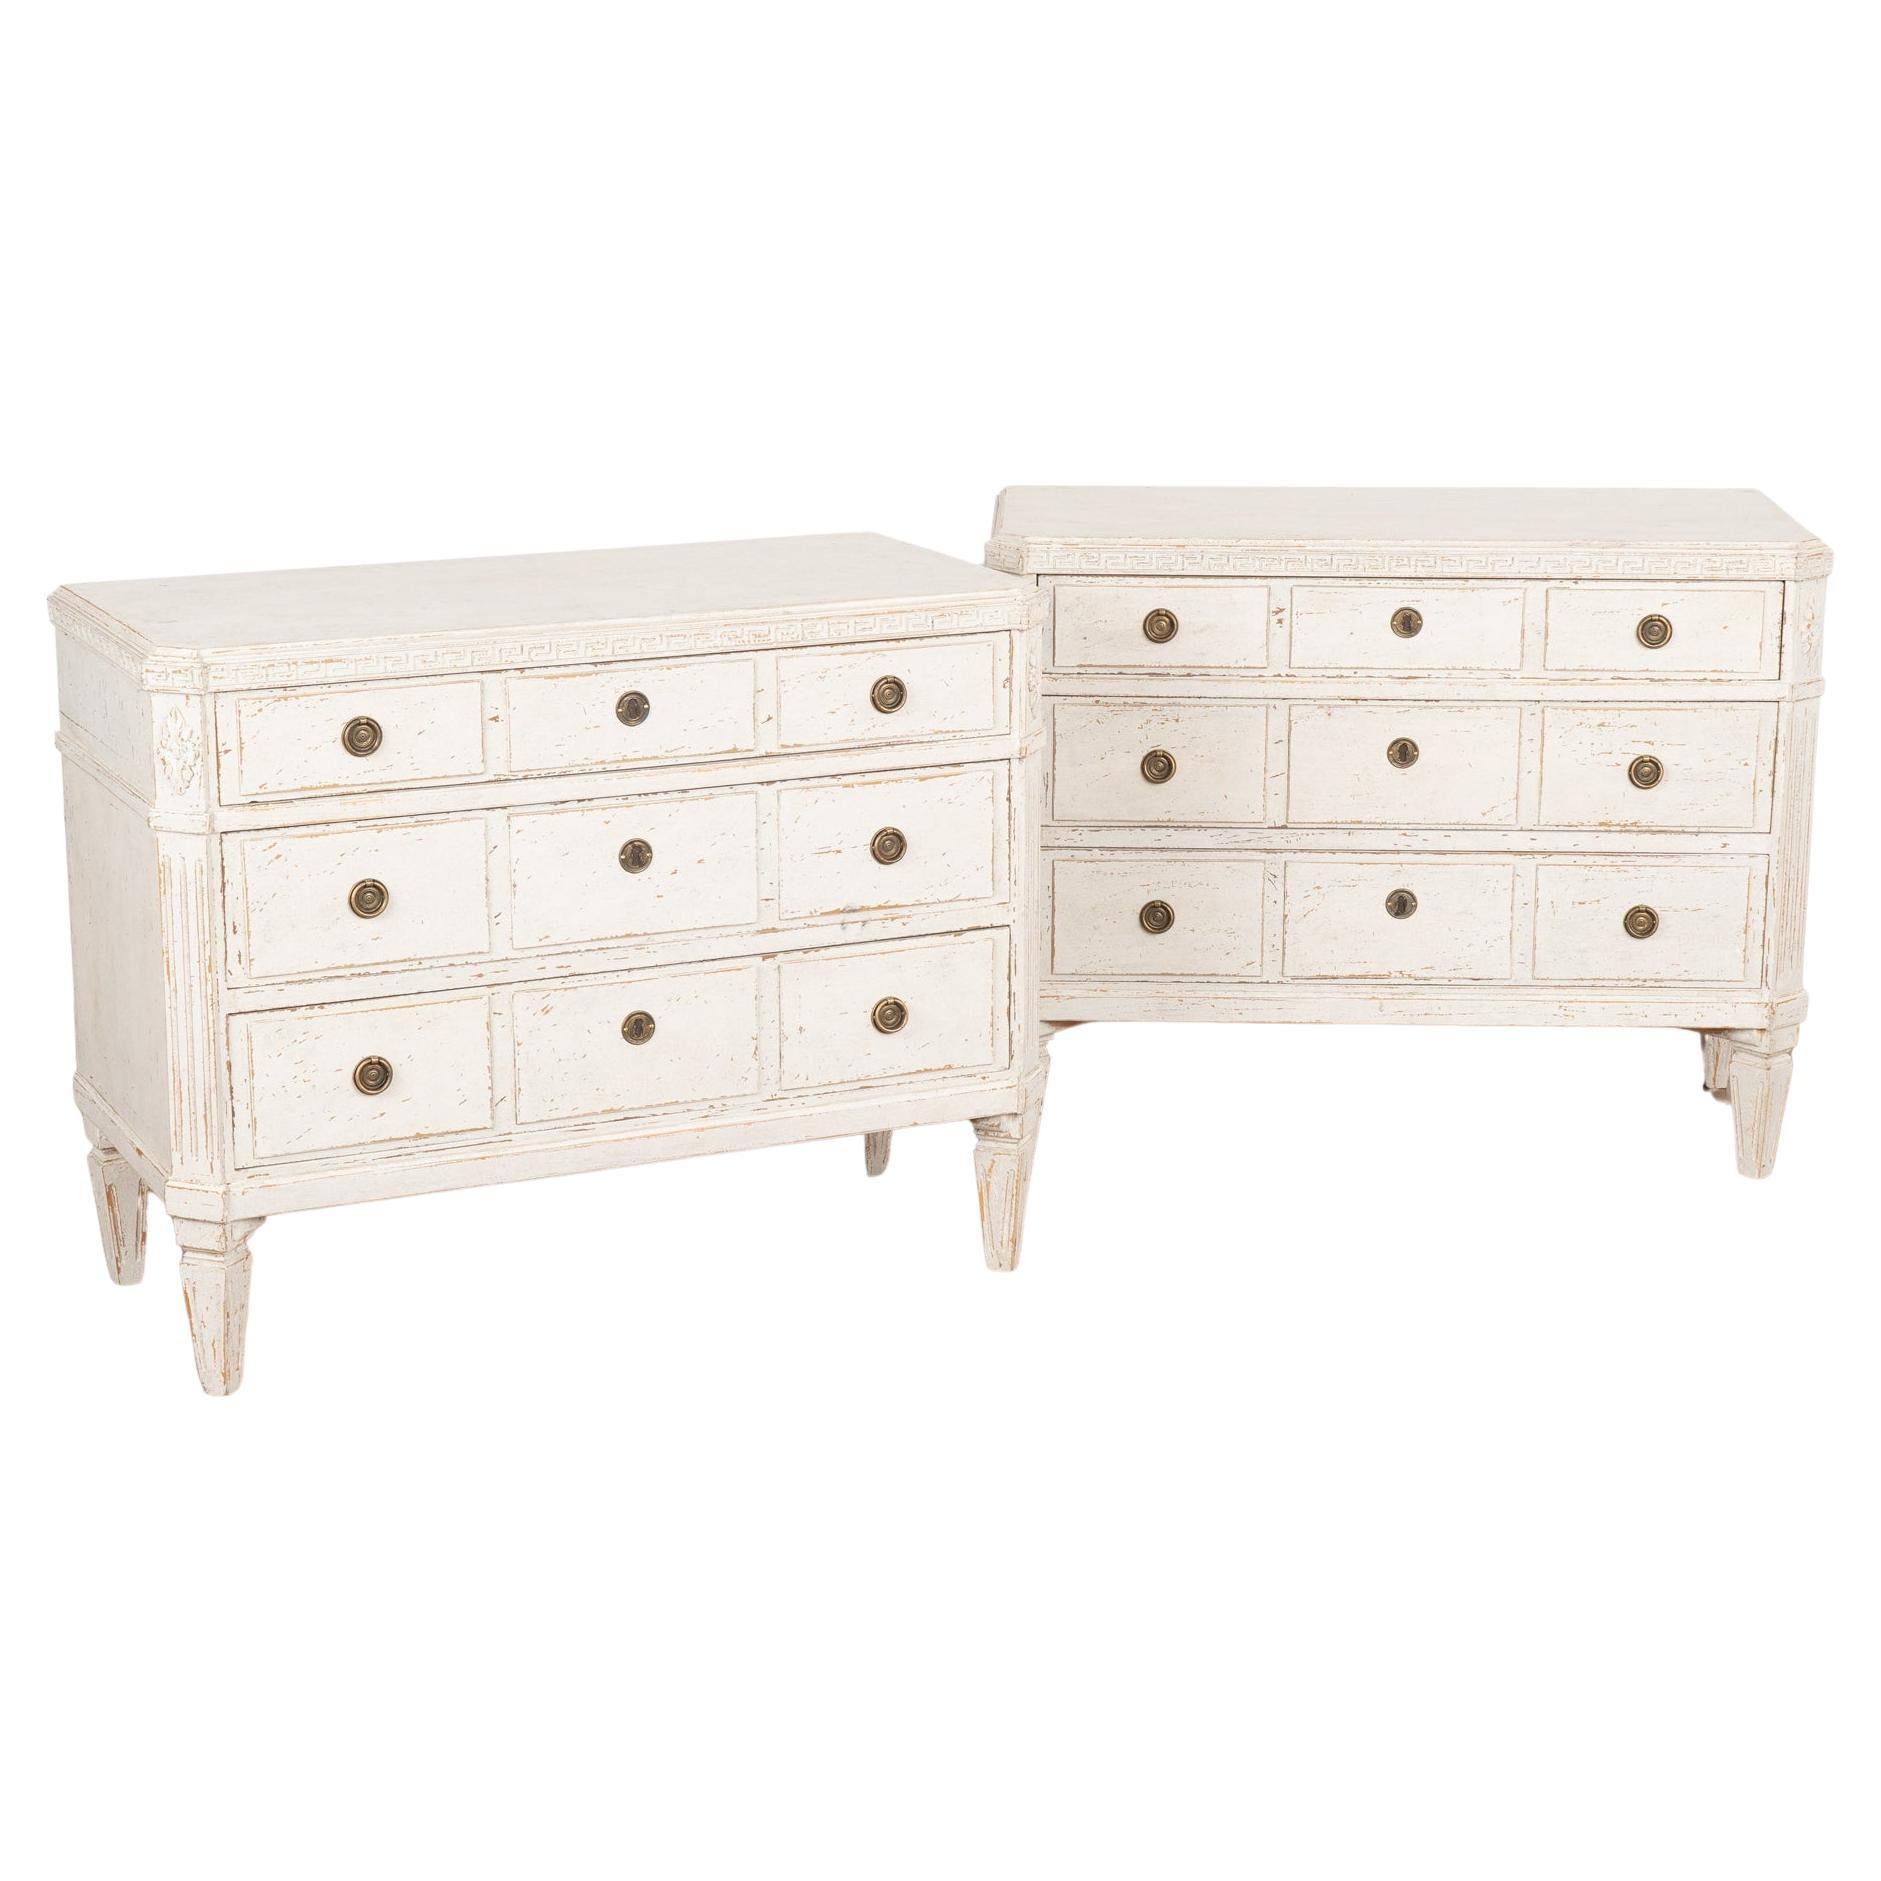 Pair White Pine Chest of Three Drawers With Greek Key Motif Sweden circa 1860-80